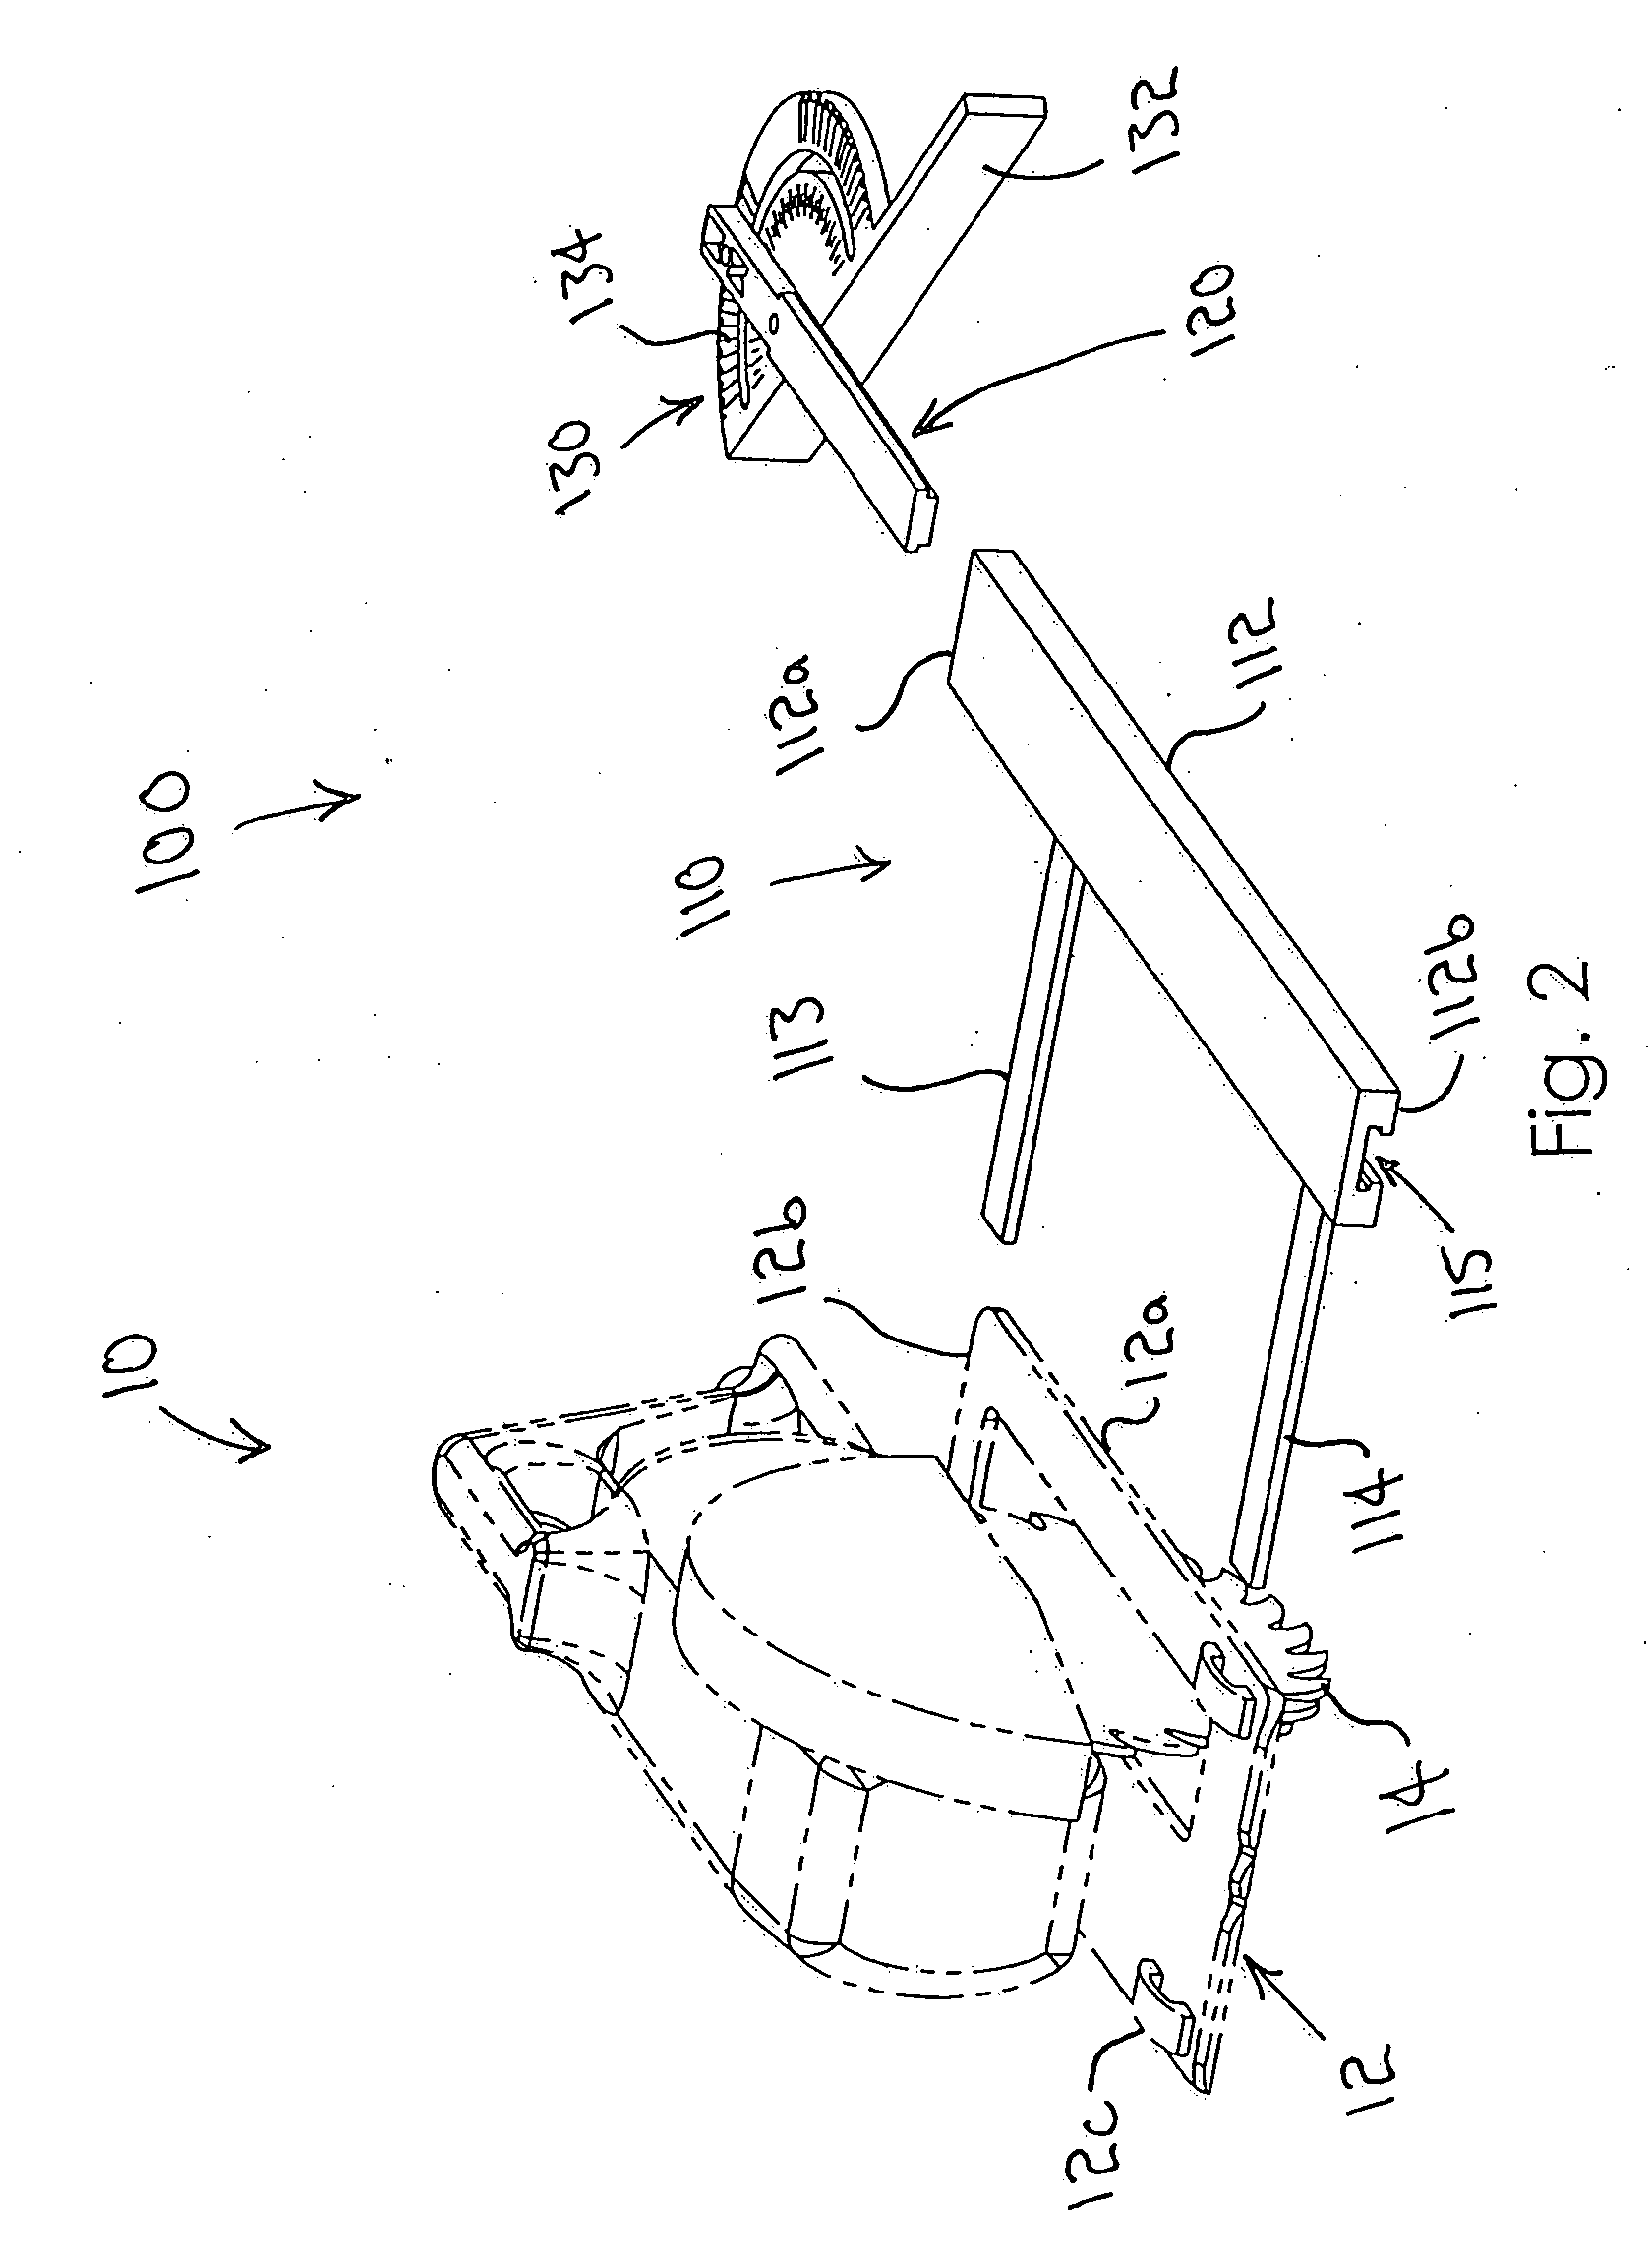 Attachable guide for a circular saw